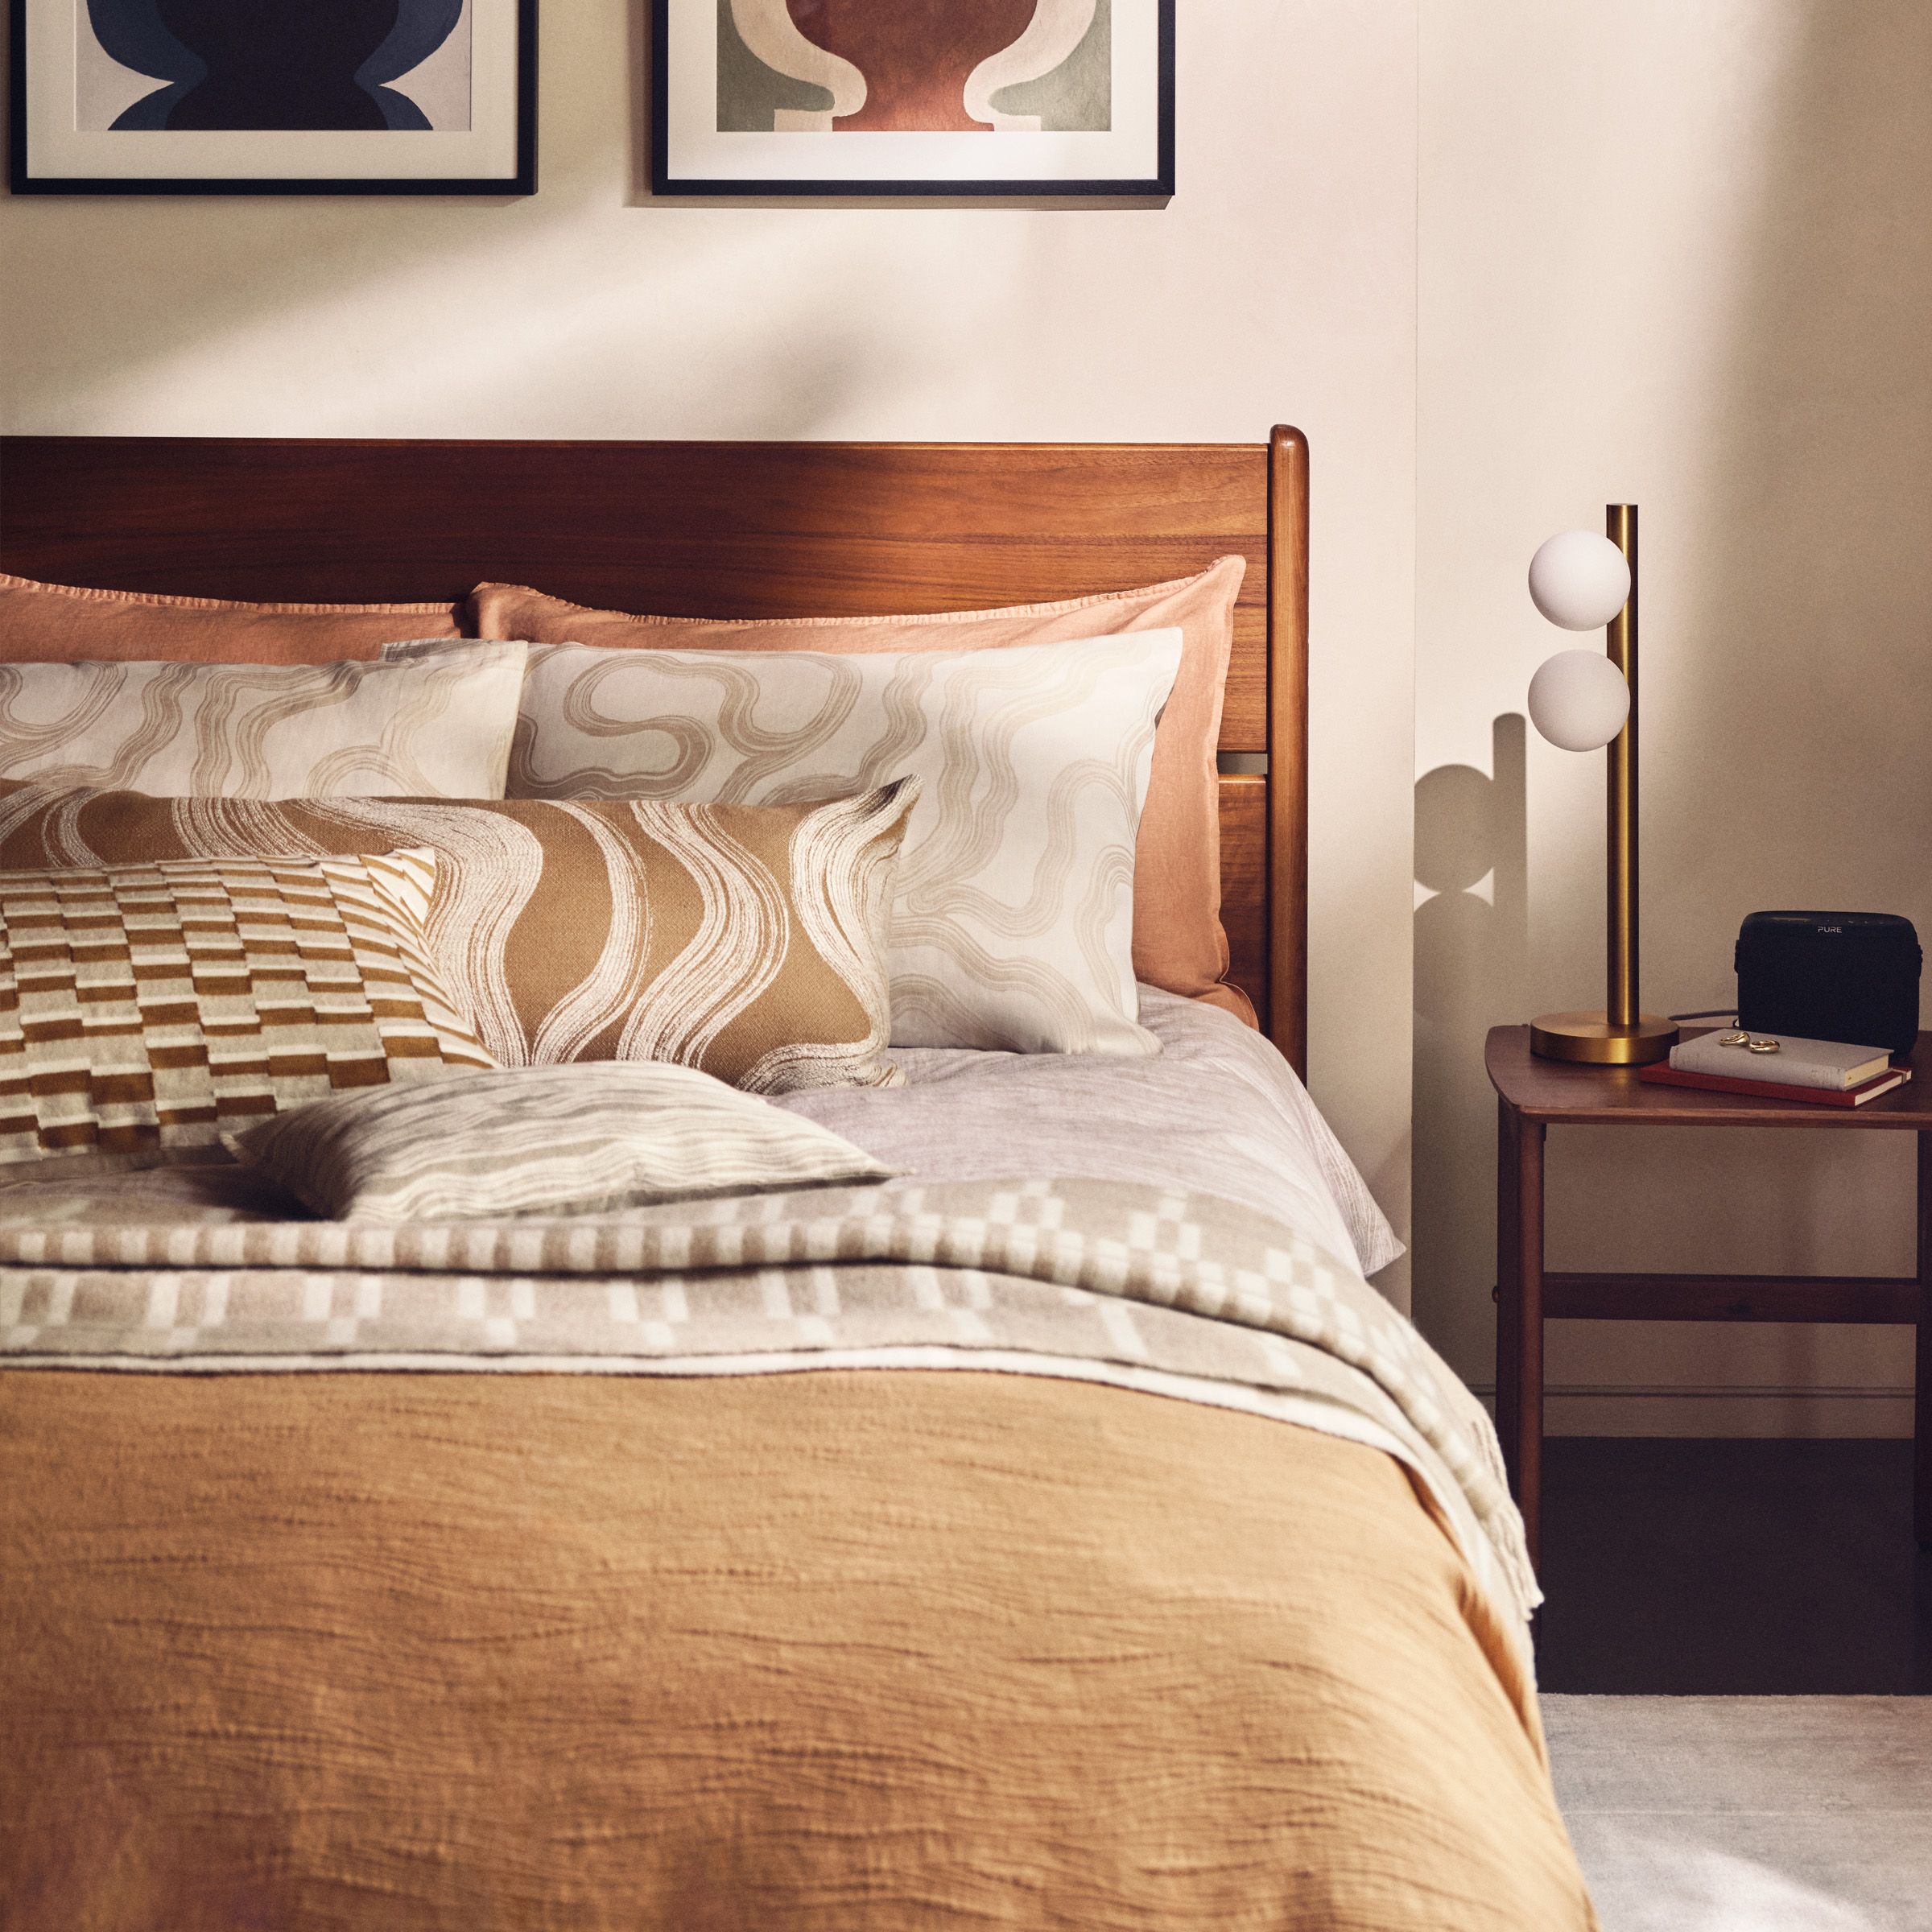 Transform your bedroom in moments with new-season bedding